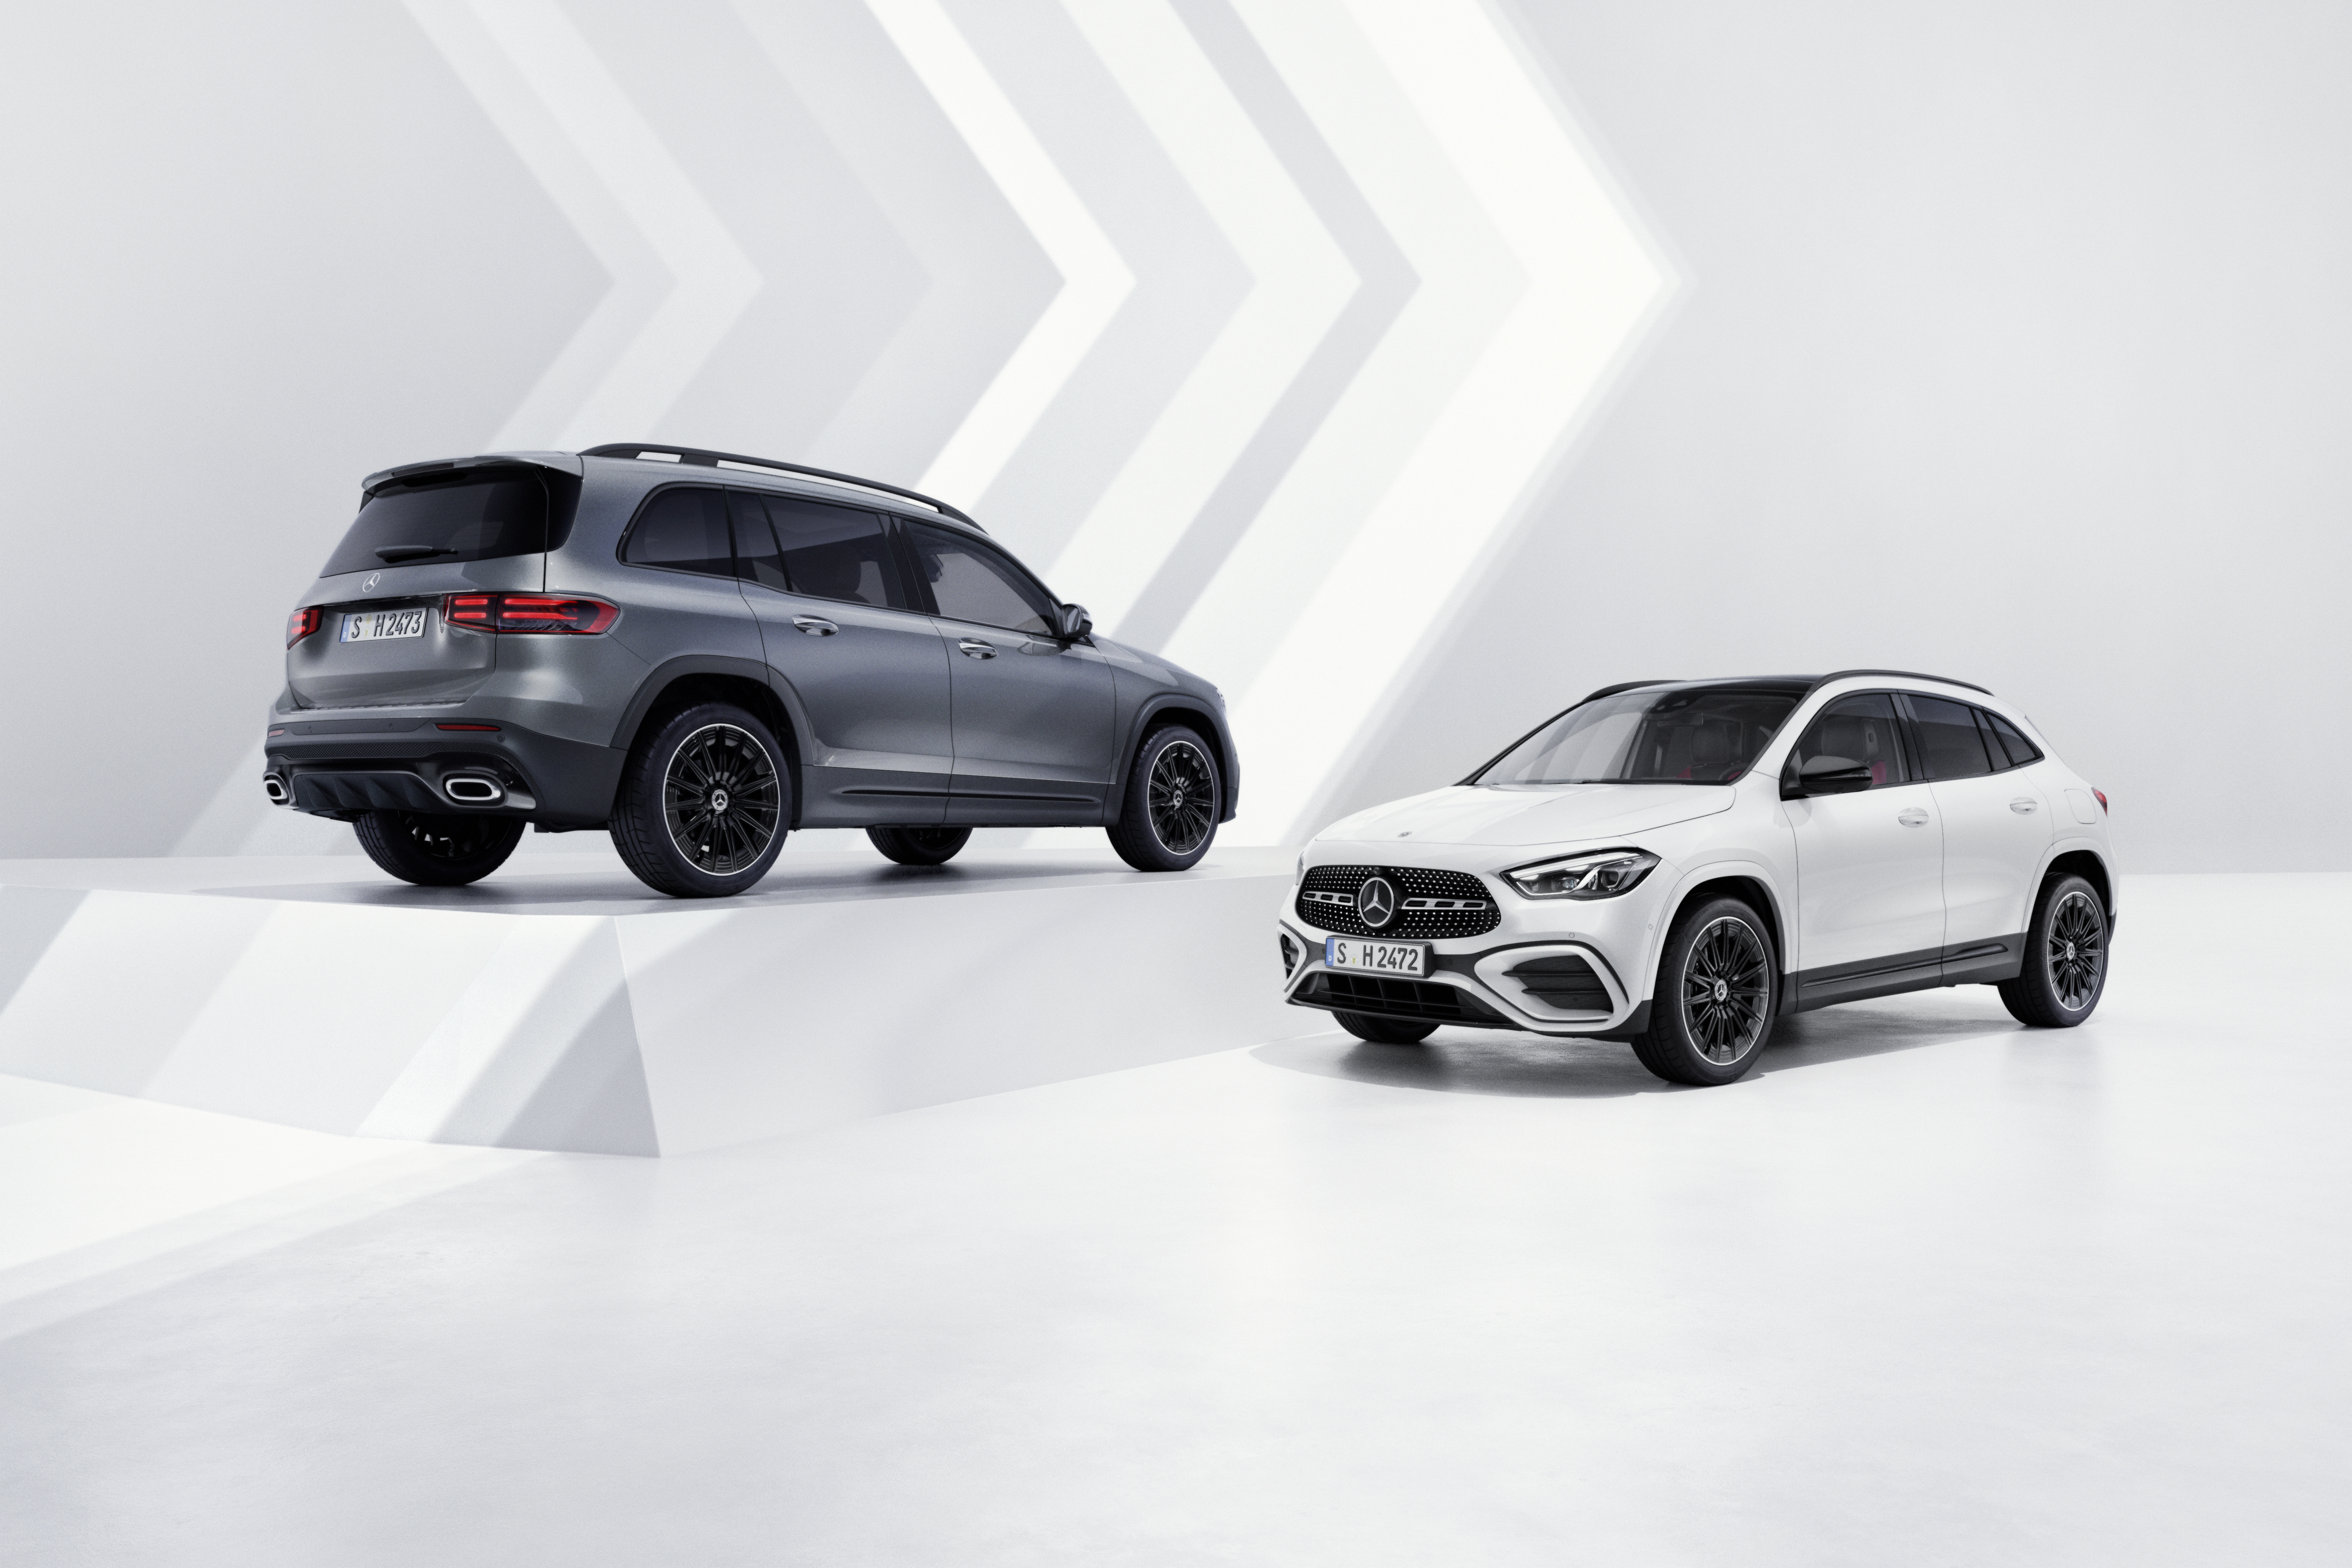 The new Mercedes-Benz GLA and GLB